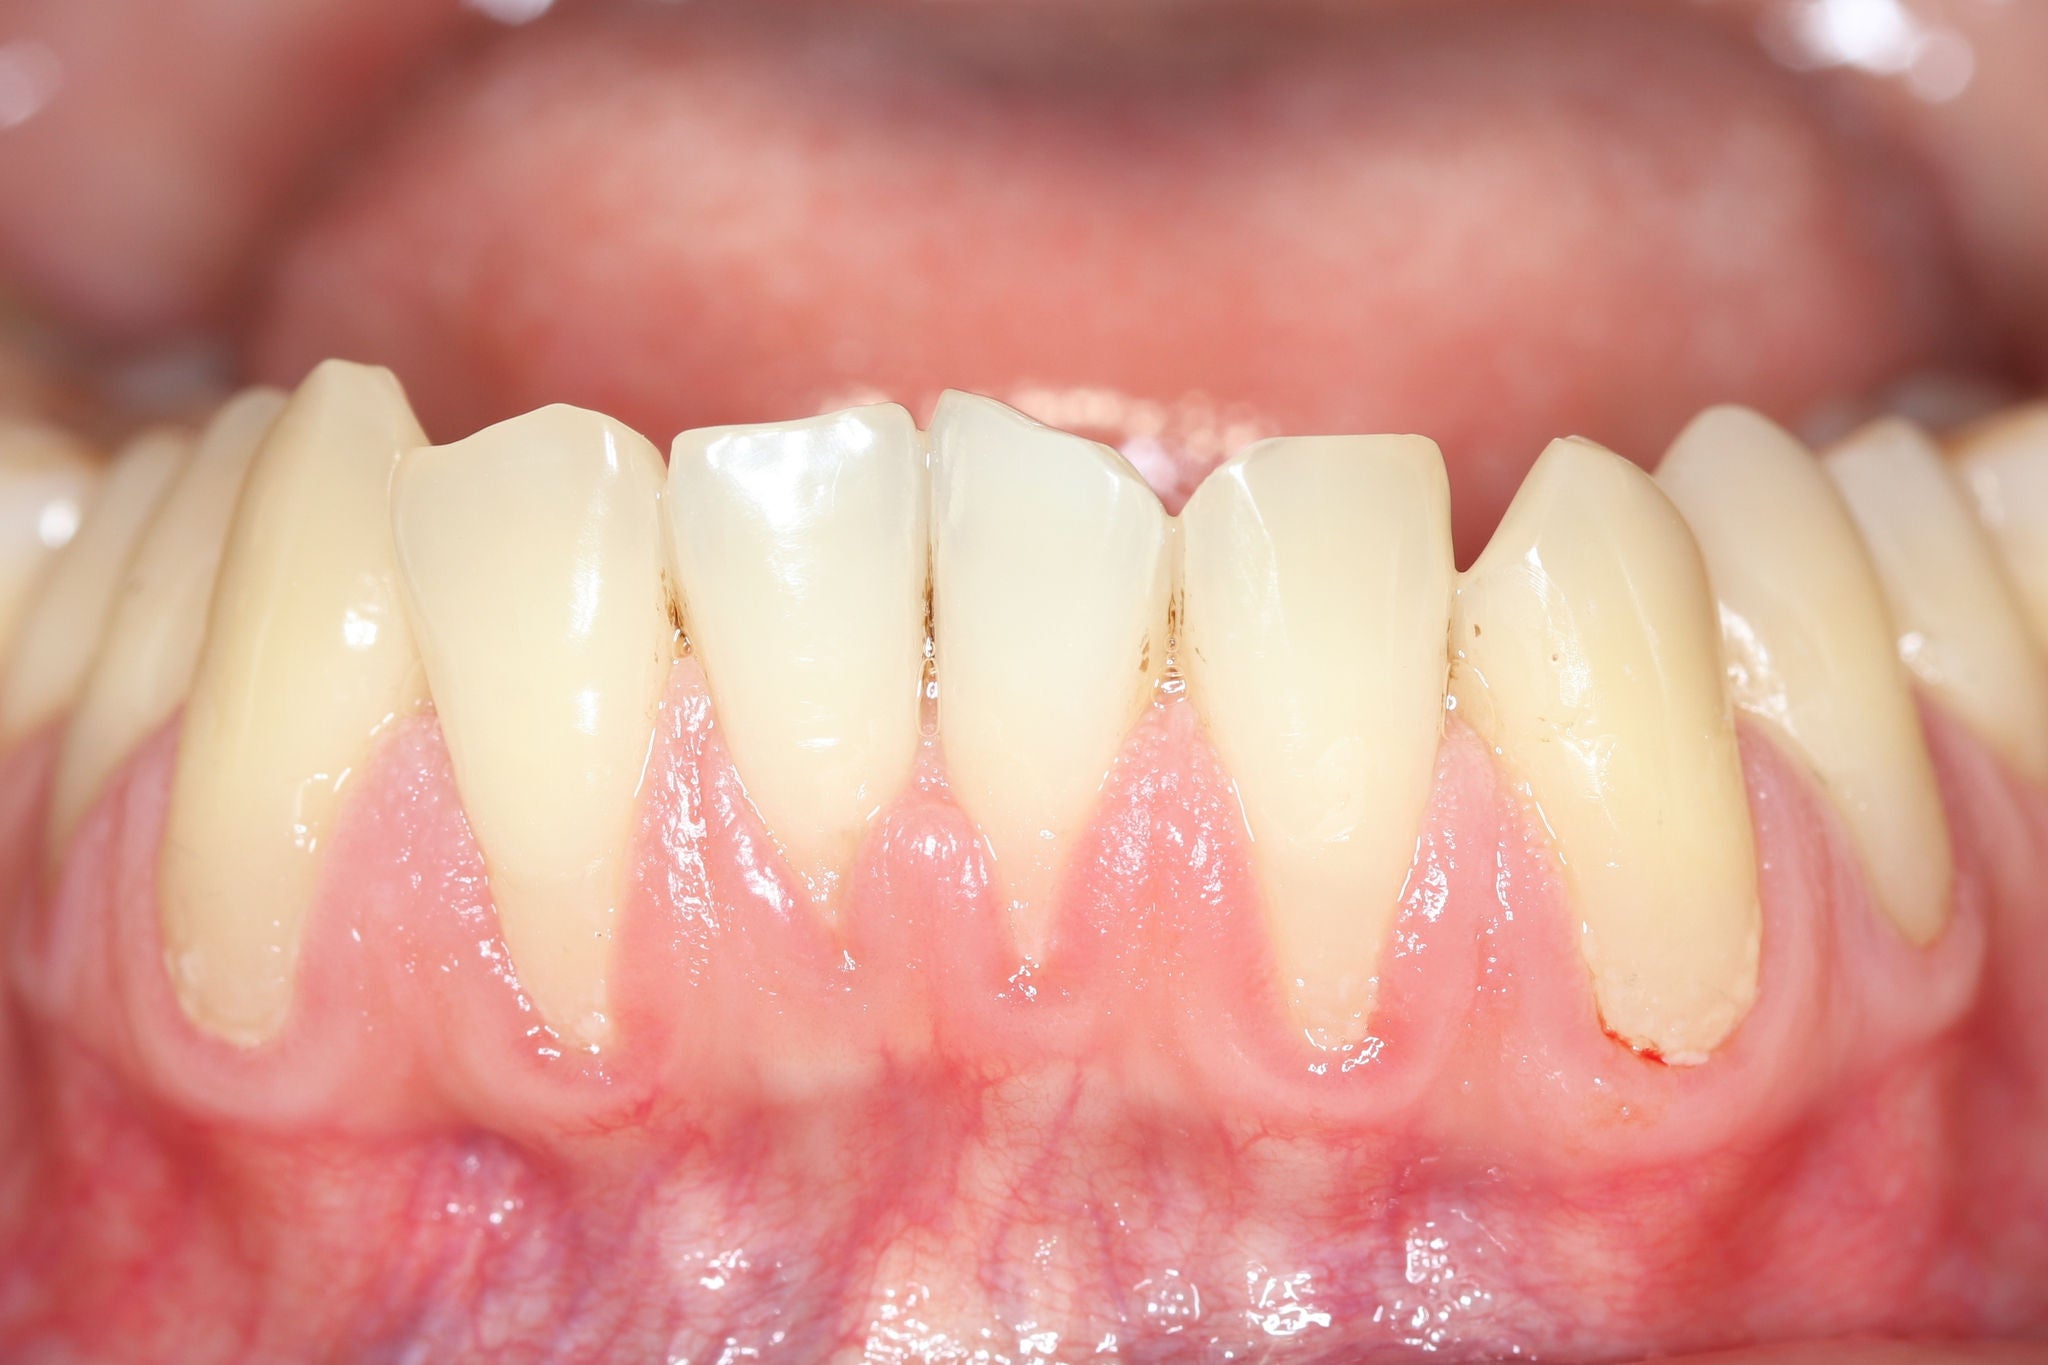 Gingival recession, also known as receding gums, is the exposure in the roots of the teeth caused by a loss of gum tissue and/or retraction of the gingival margin from the crown of the teeth